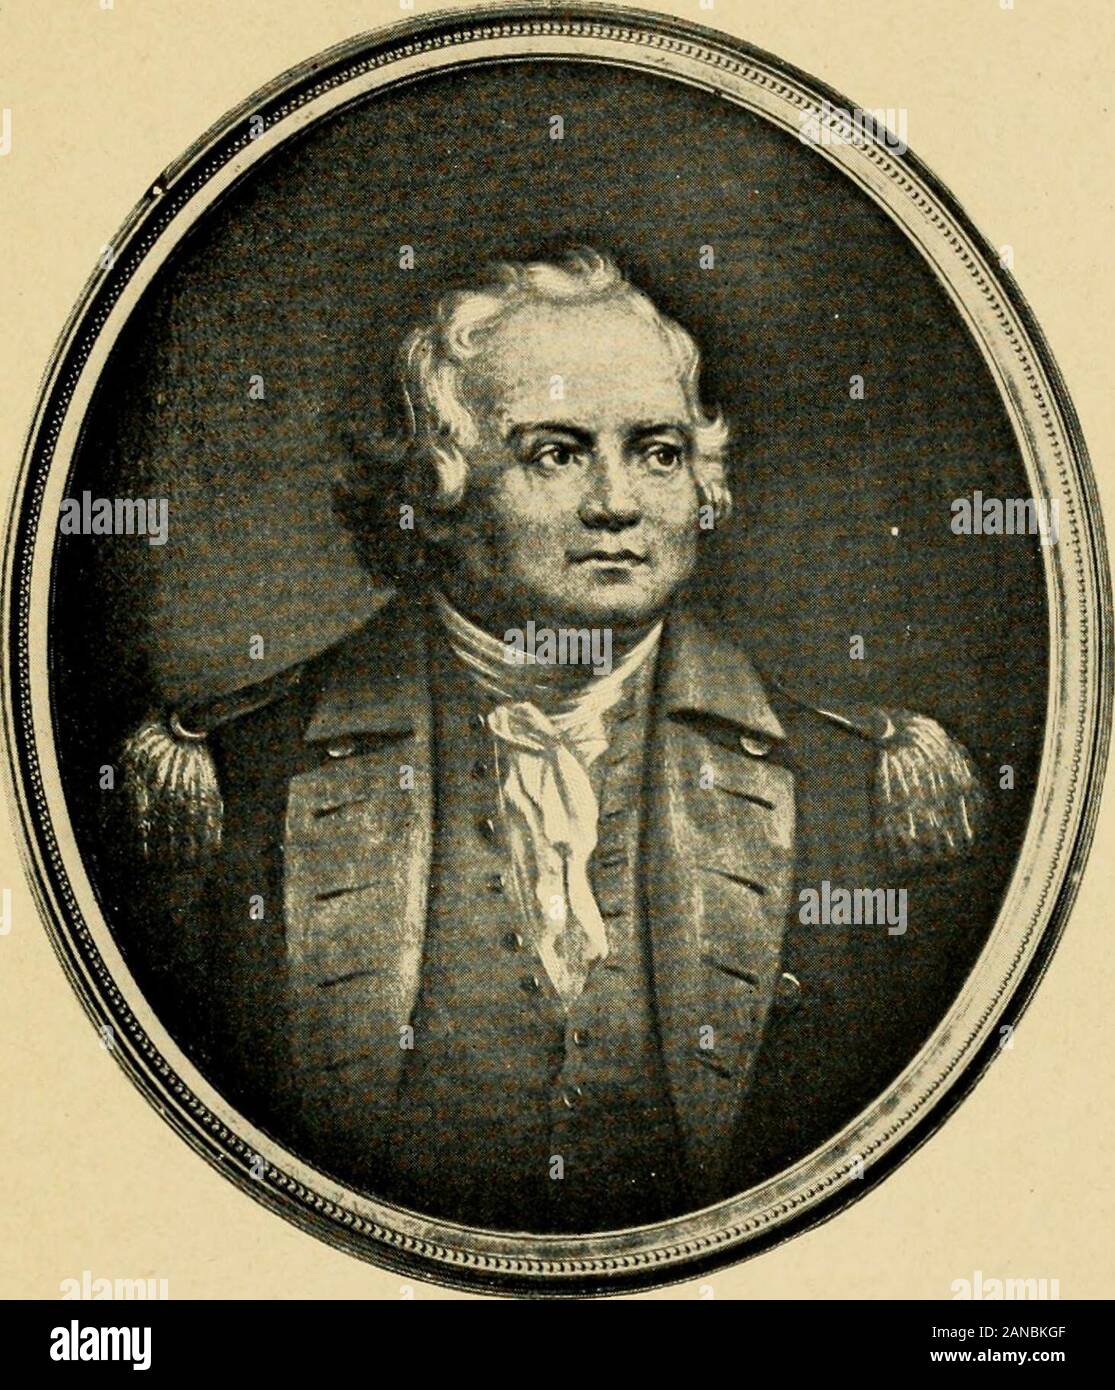 Israel Putnam ('Old Put'); a story for young people . e balls were continually pouring in fromthe British forts, killing the men and tearing theworks. The Americans could not accomplish anything ofimportance for many months on account of theirscarcity of ammunition and cannon. At last, inthe following spring, Washington received a num-ber of cannon brought by Henry Knox from Ticon-deroga on sledges. He resolved to seize Dorches-ter Heights. At the council of war, where theofficers met to plan the attack, Putnam was restless,continually going to doors and windows, to seewhat was going on outsid Stock Photo